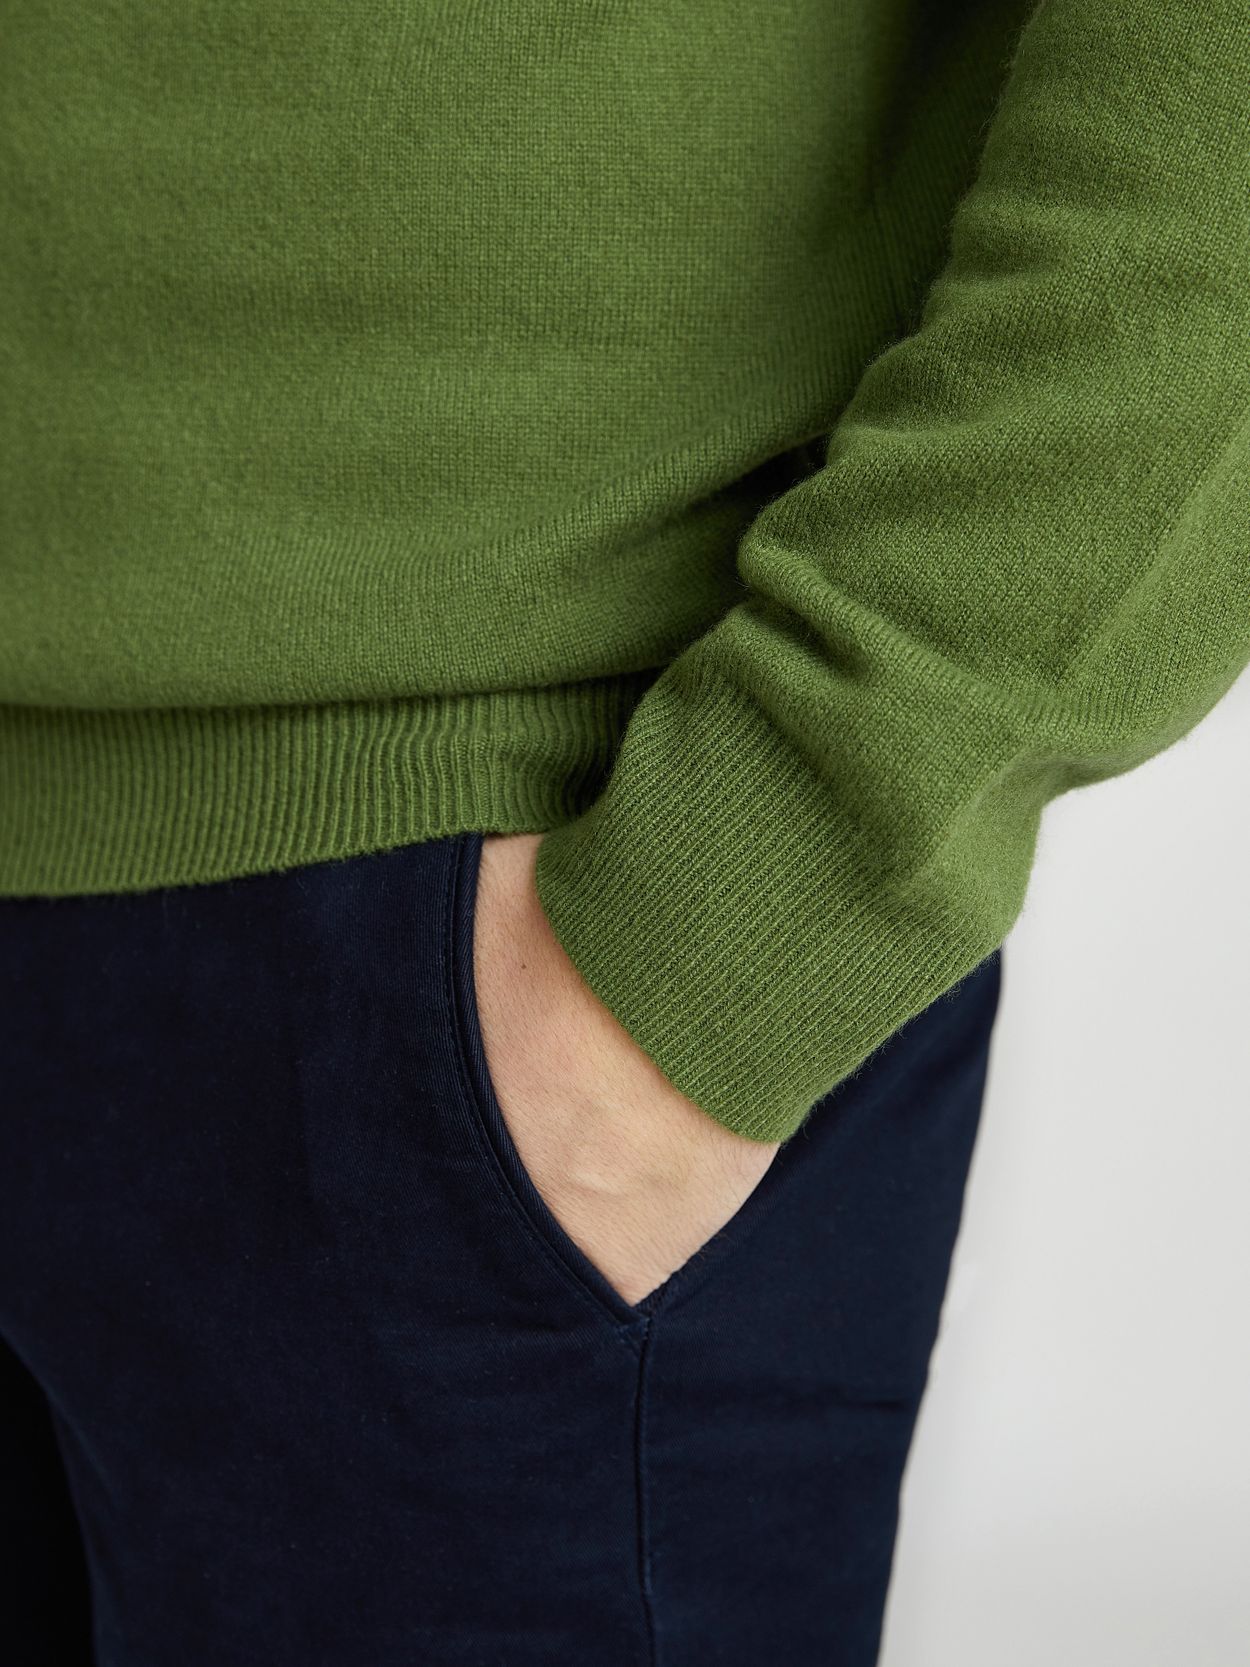 Green Cashmere Sweater